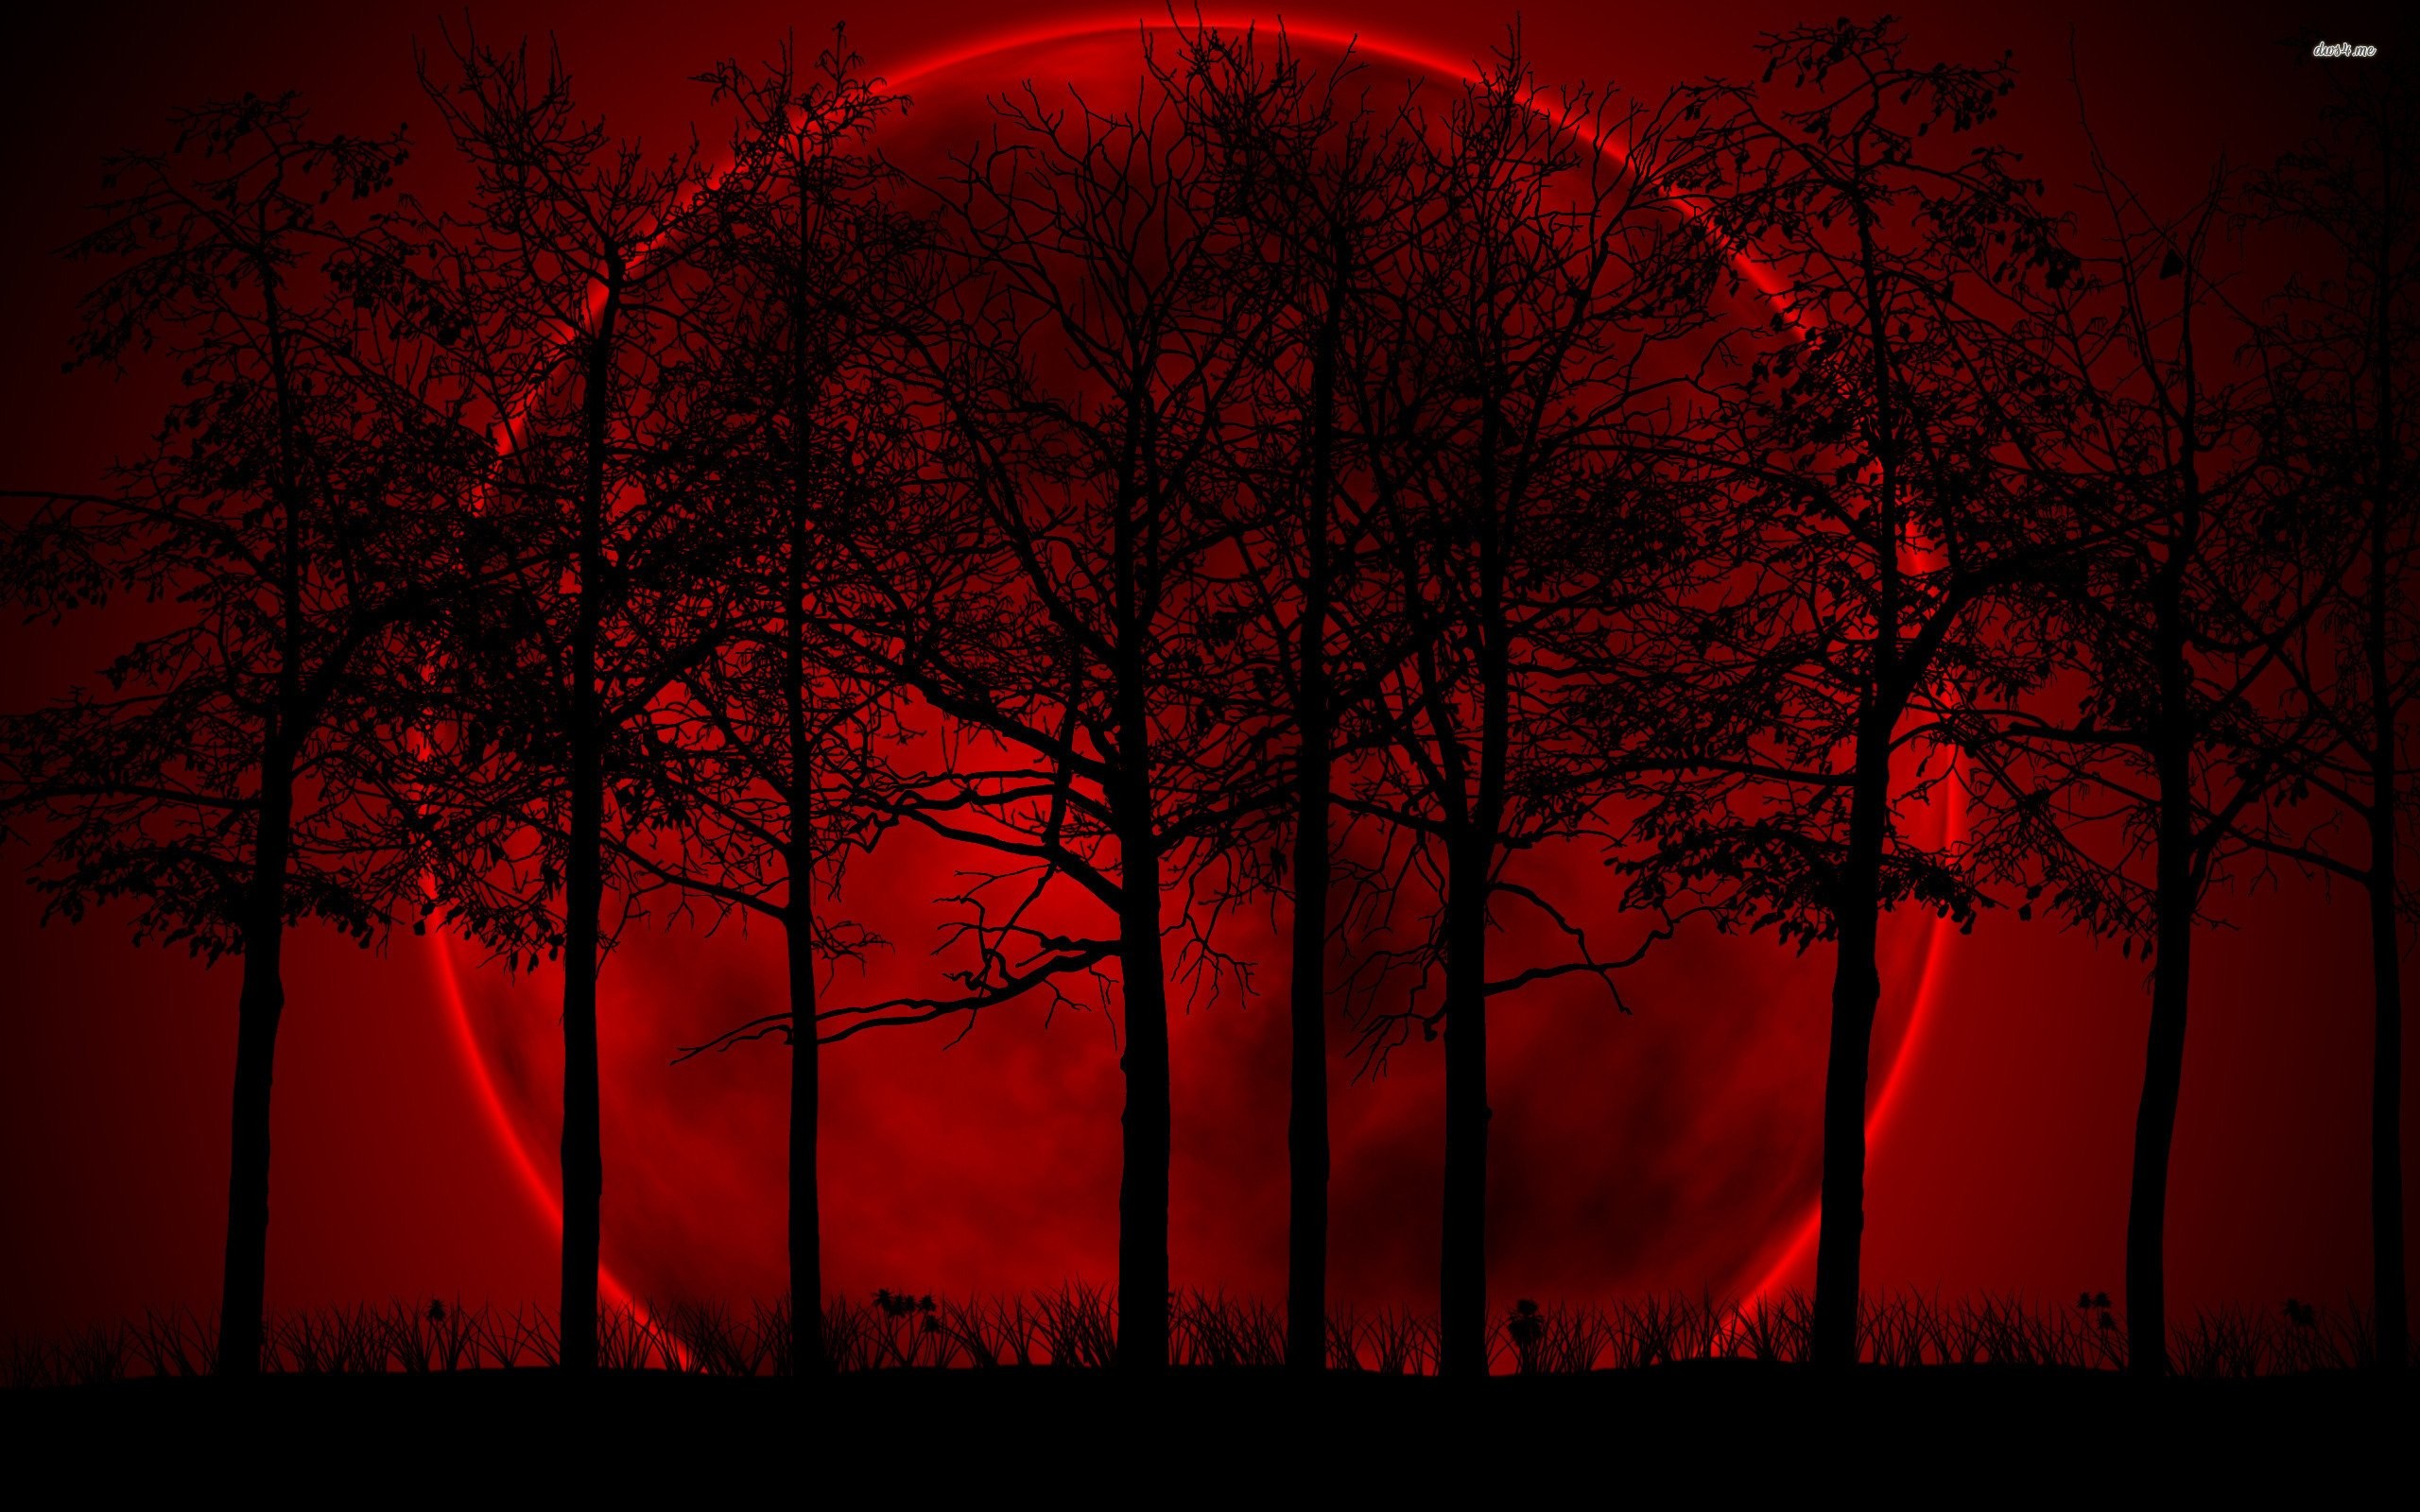 Red Moon Wallpaper 62 Pictures